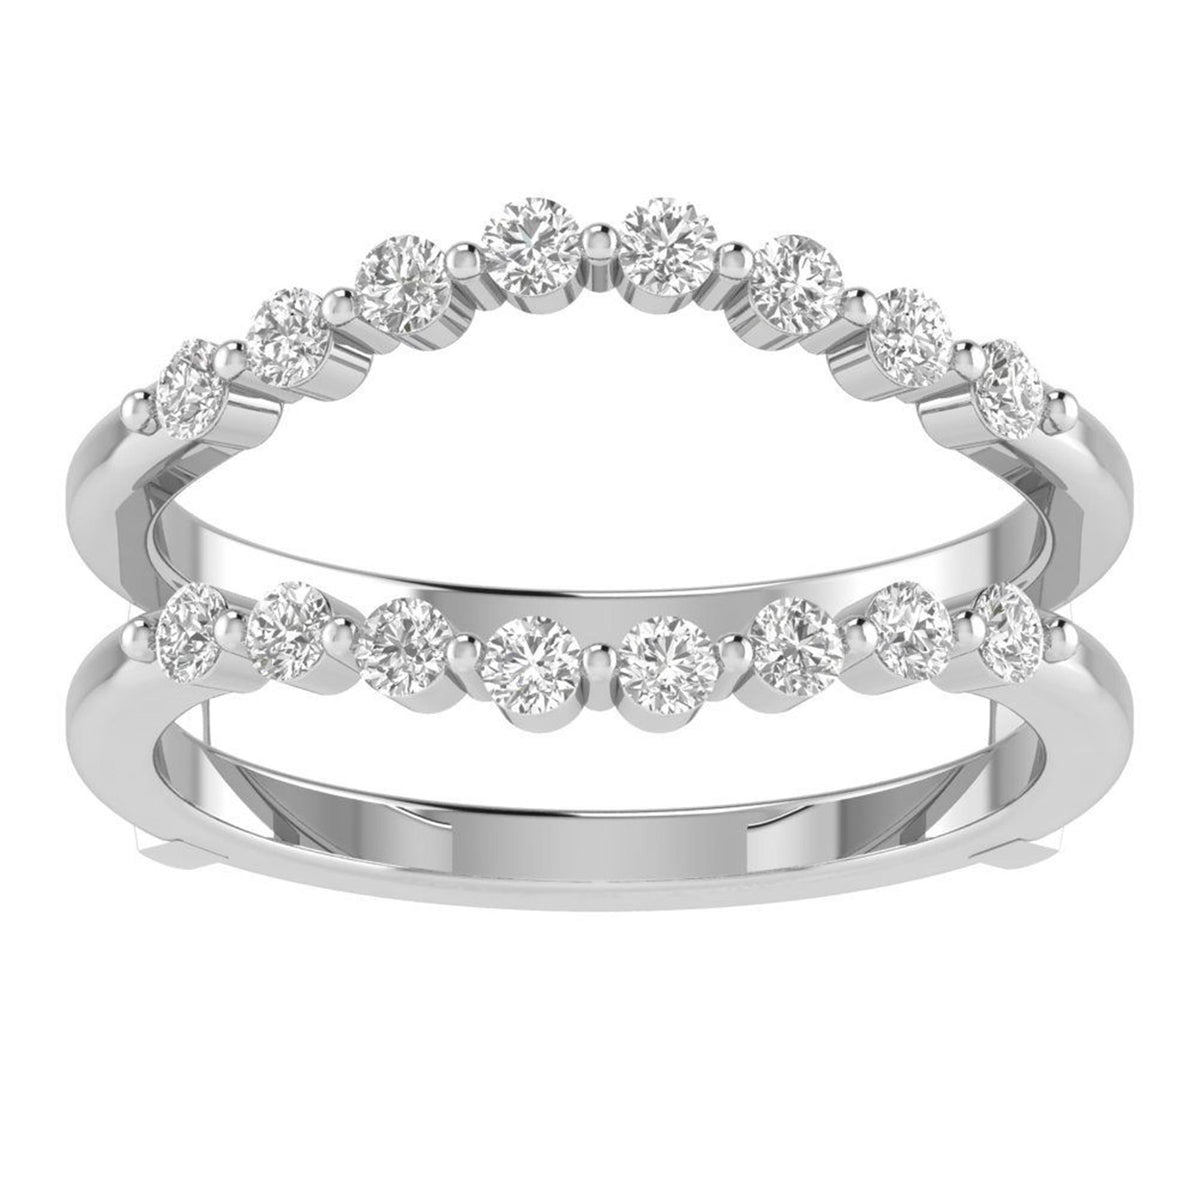 14Kt White Gold Vanessa Insert Guard / Wrap Ring With 0.48cttw Natural Diamonds